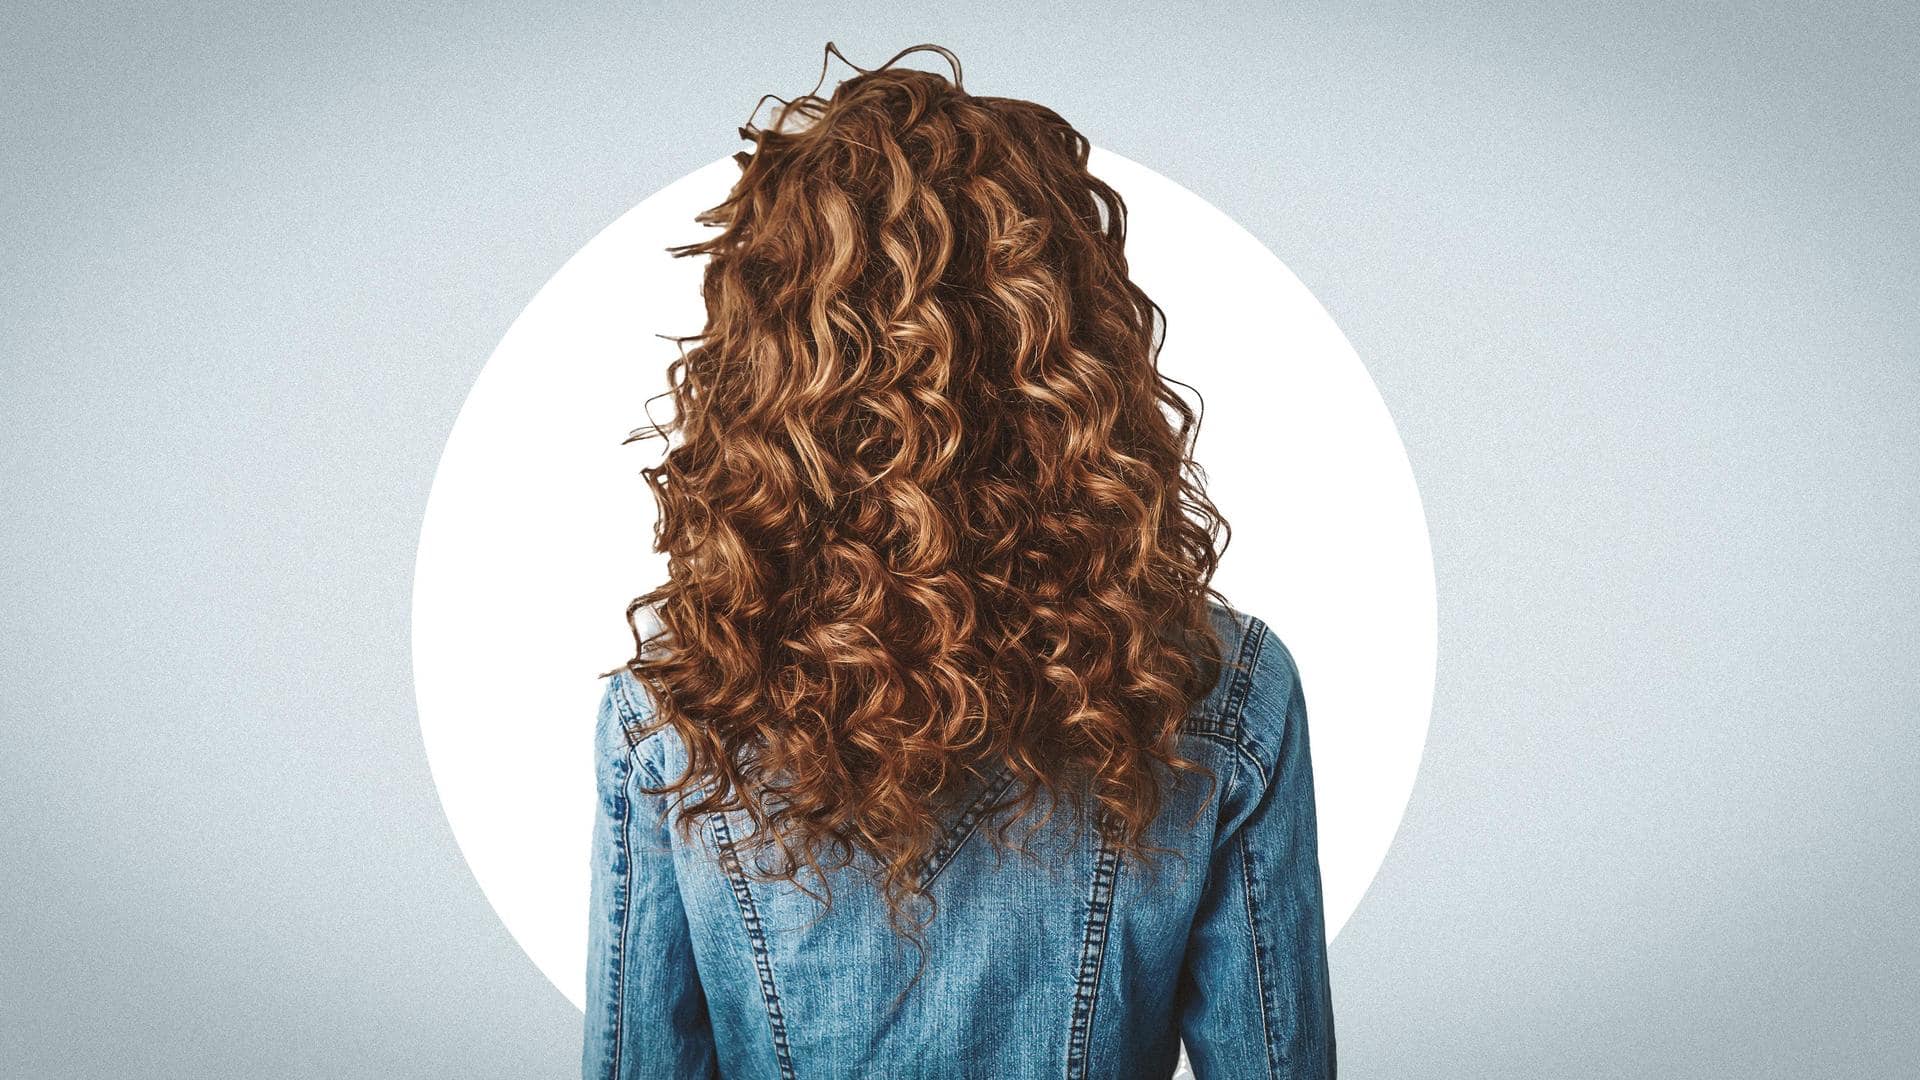 Curly hair might have evolved as defense against sun: Study